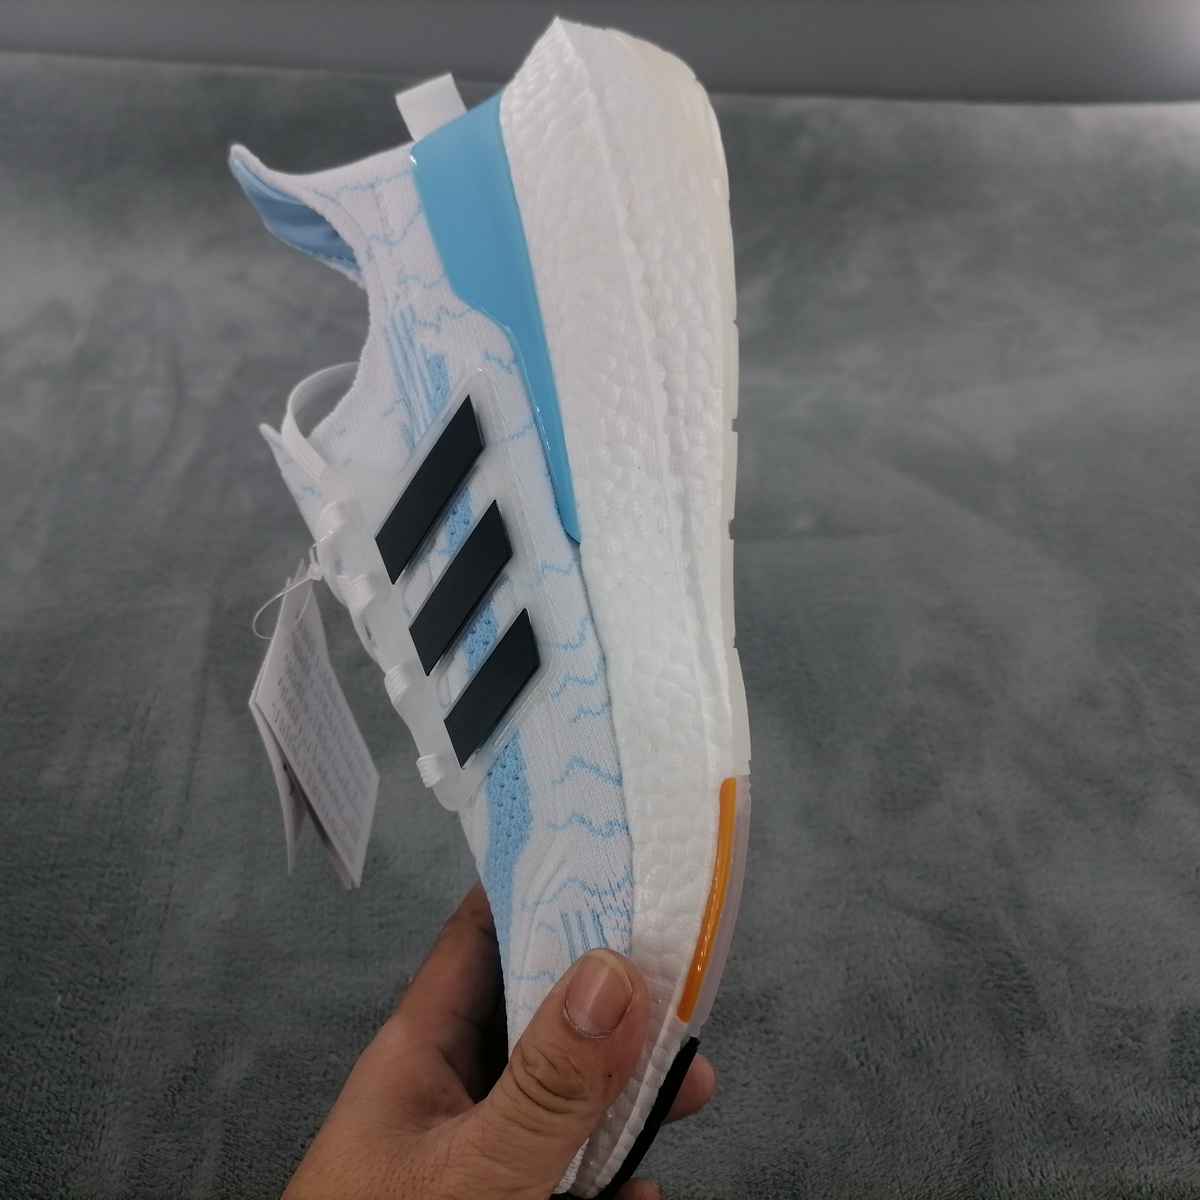 Adidas Ultra Boost 21 Argentina National Soccer Team GZ7120 - Shop Now!